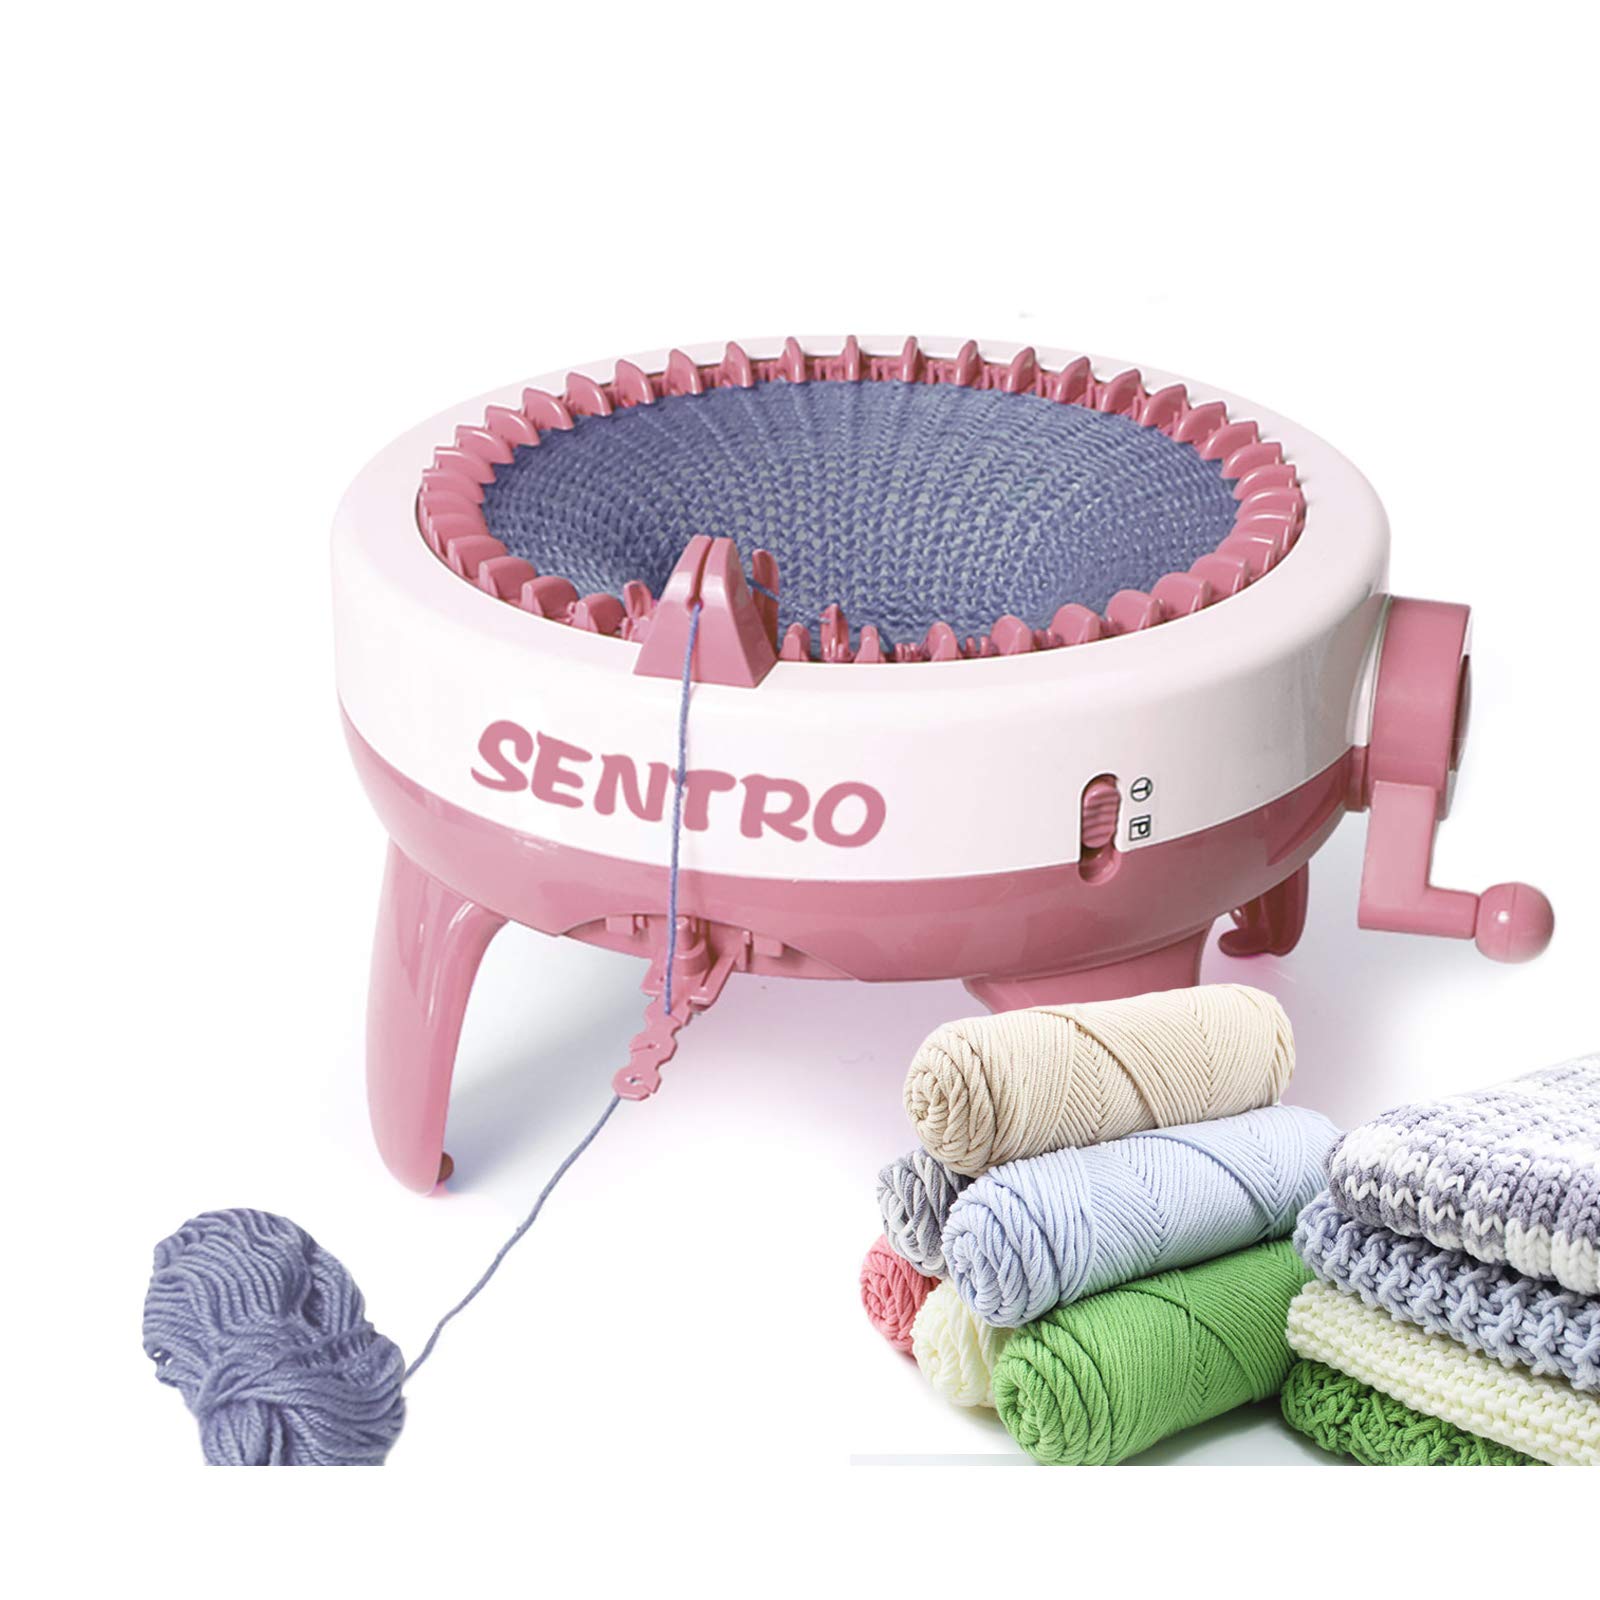 Needles Knitting Machines With Row Counter, Smart Knitting Round Loom For  Adults/kids